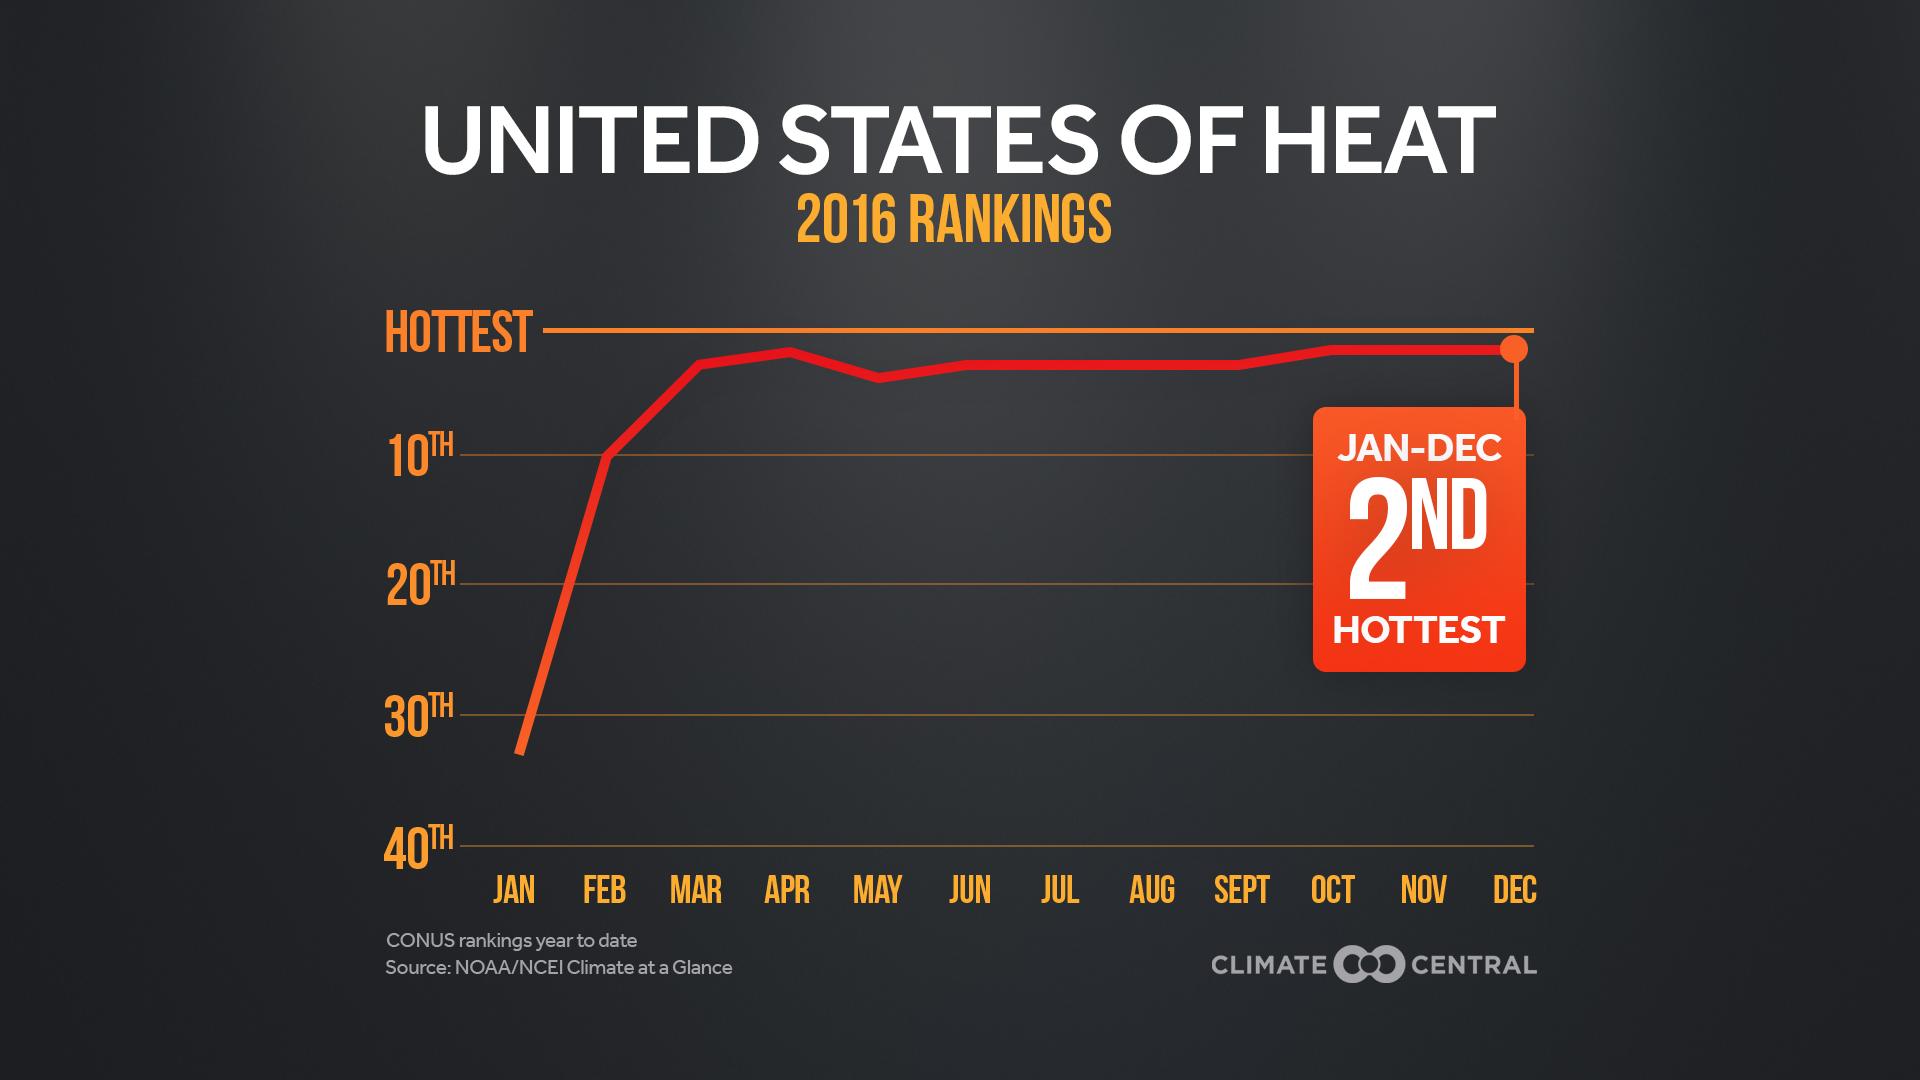 Set 2 - 2016: 2nd Hottest Year in the U.S.